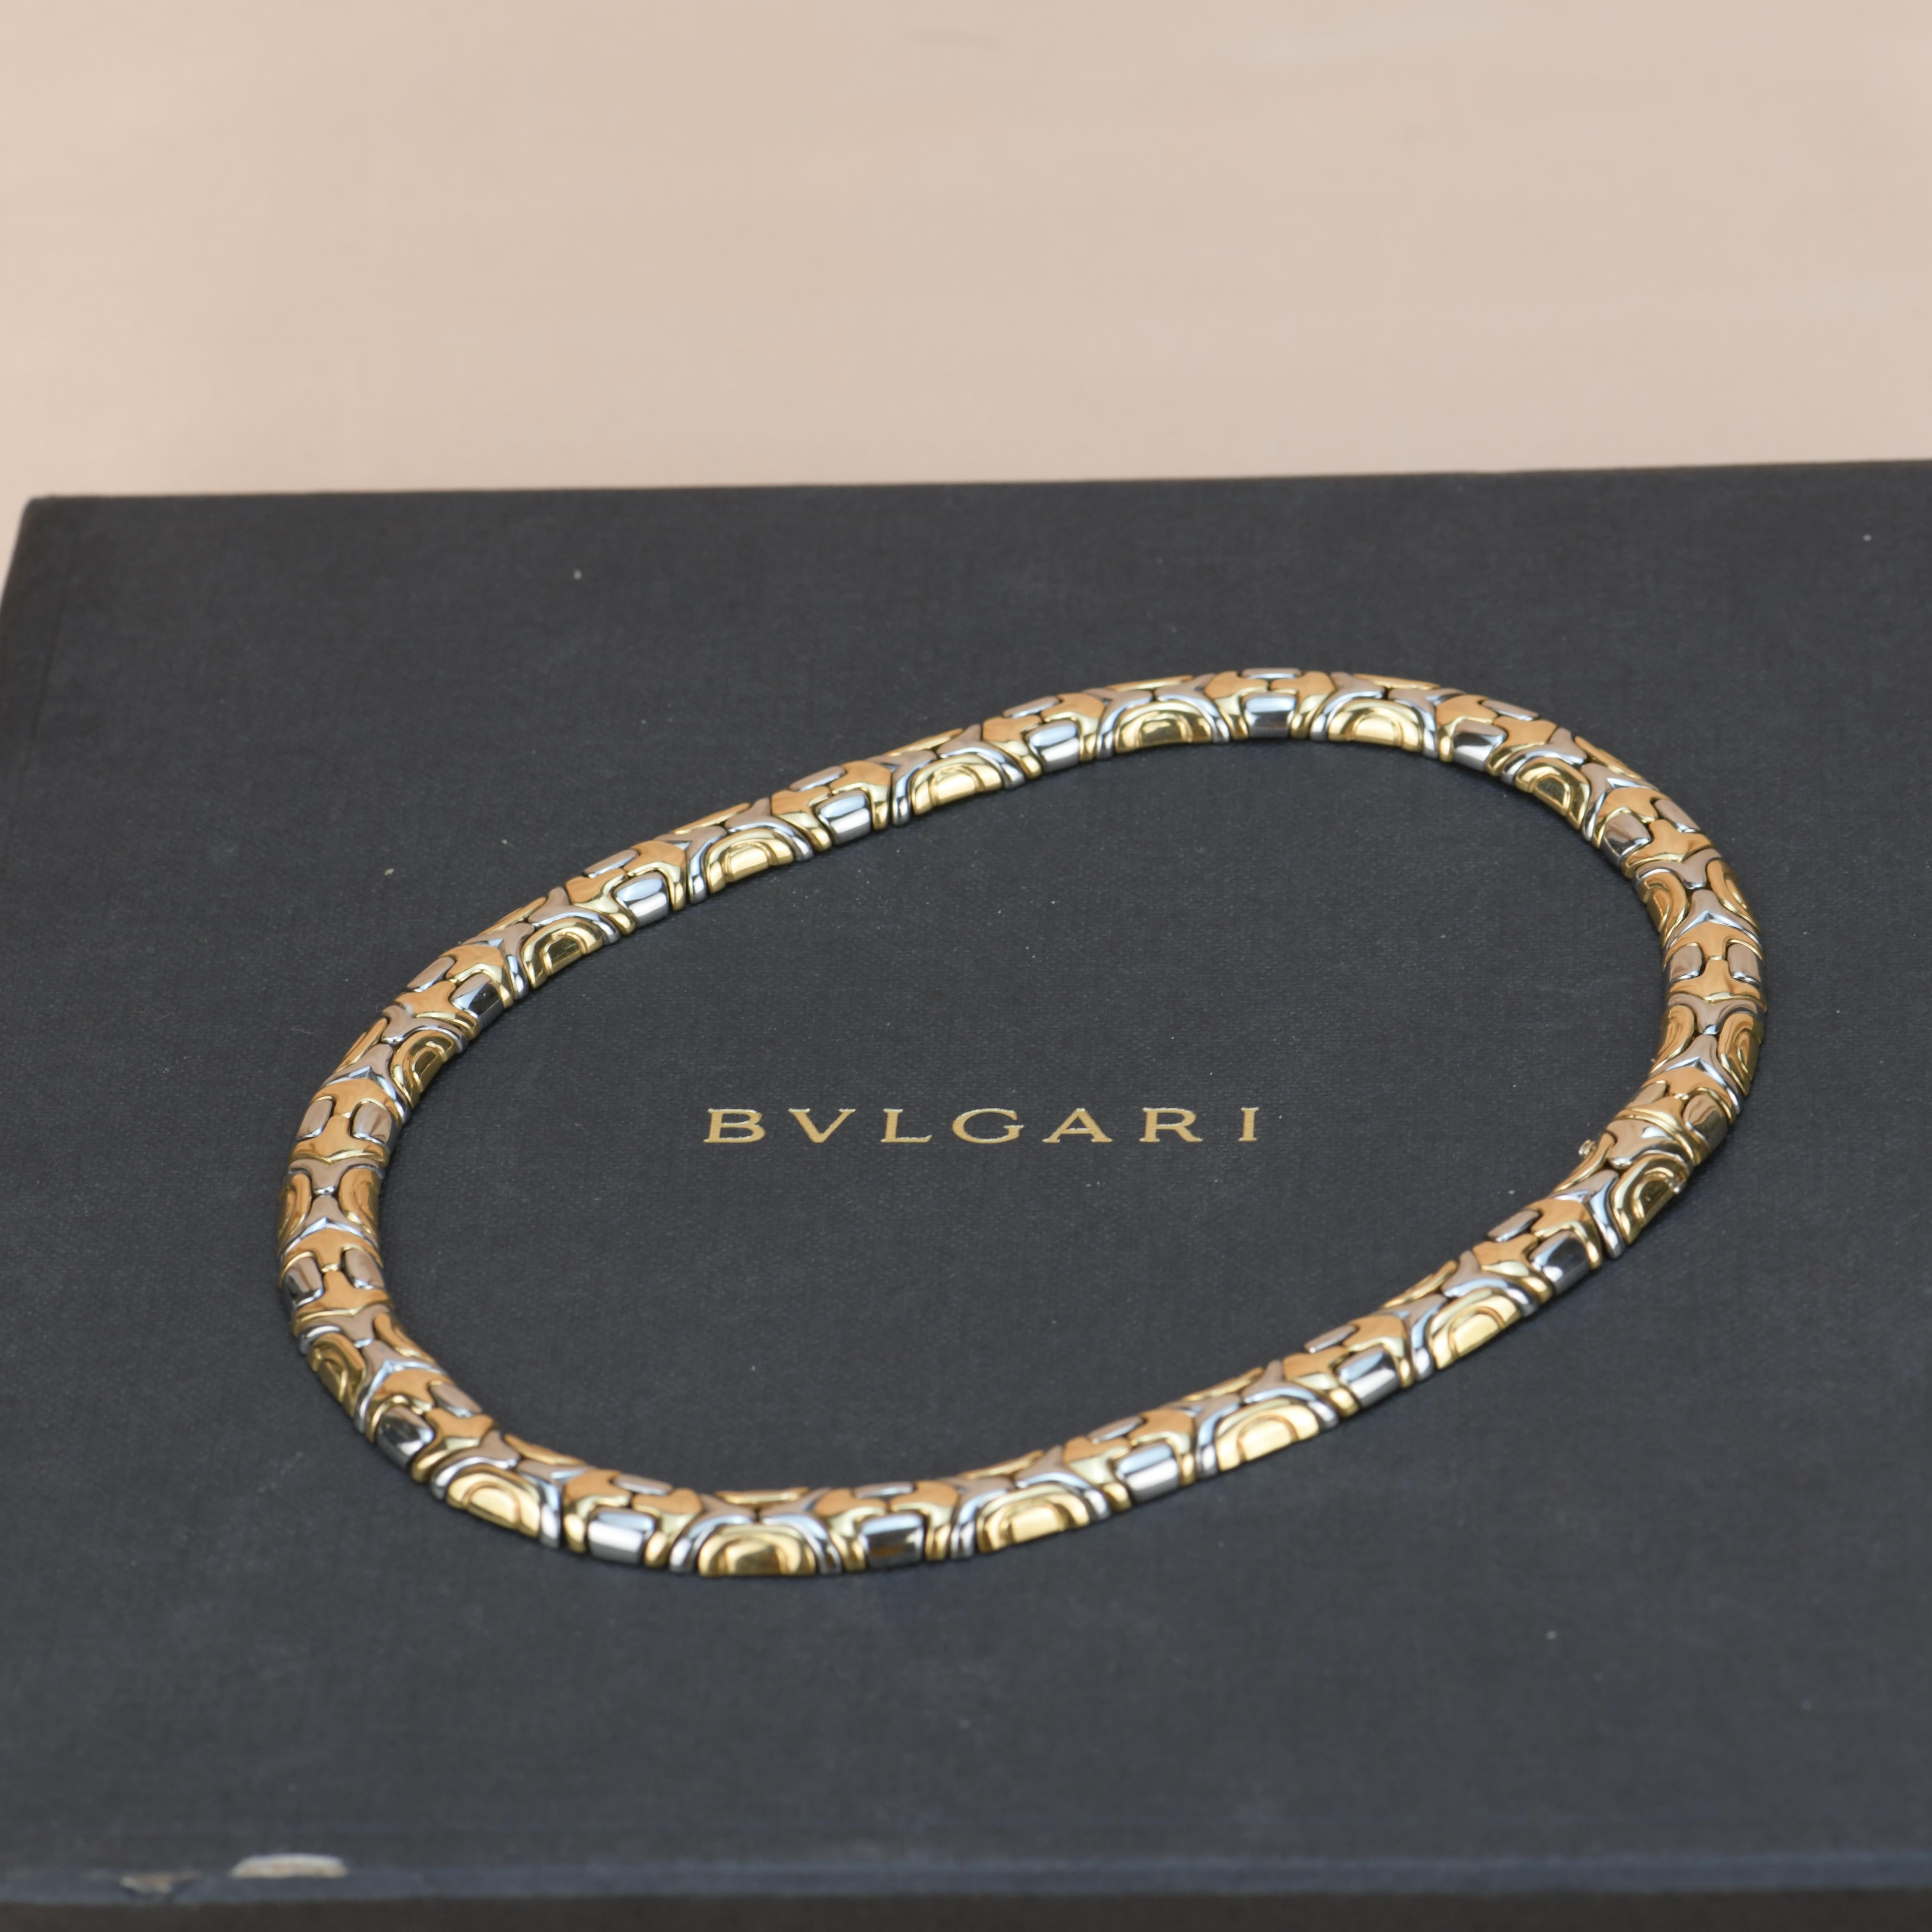 Brand Bvlgari
Model Alveare
Date Circa 1990's 
__________________________________
Metal 18K Yellow Gold
Length Approx 41cm
weight 81g
__________________________________
Condition Excellent 
Comes with Bvlgari Box / Dandelion Antiques Authentic